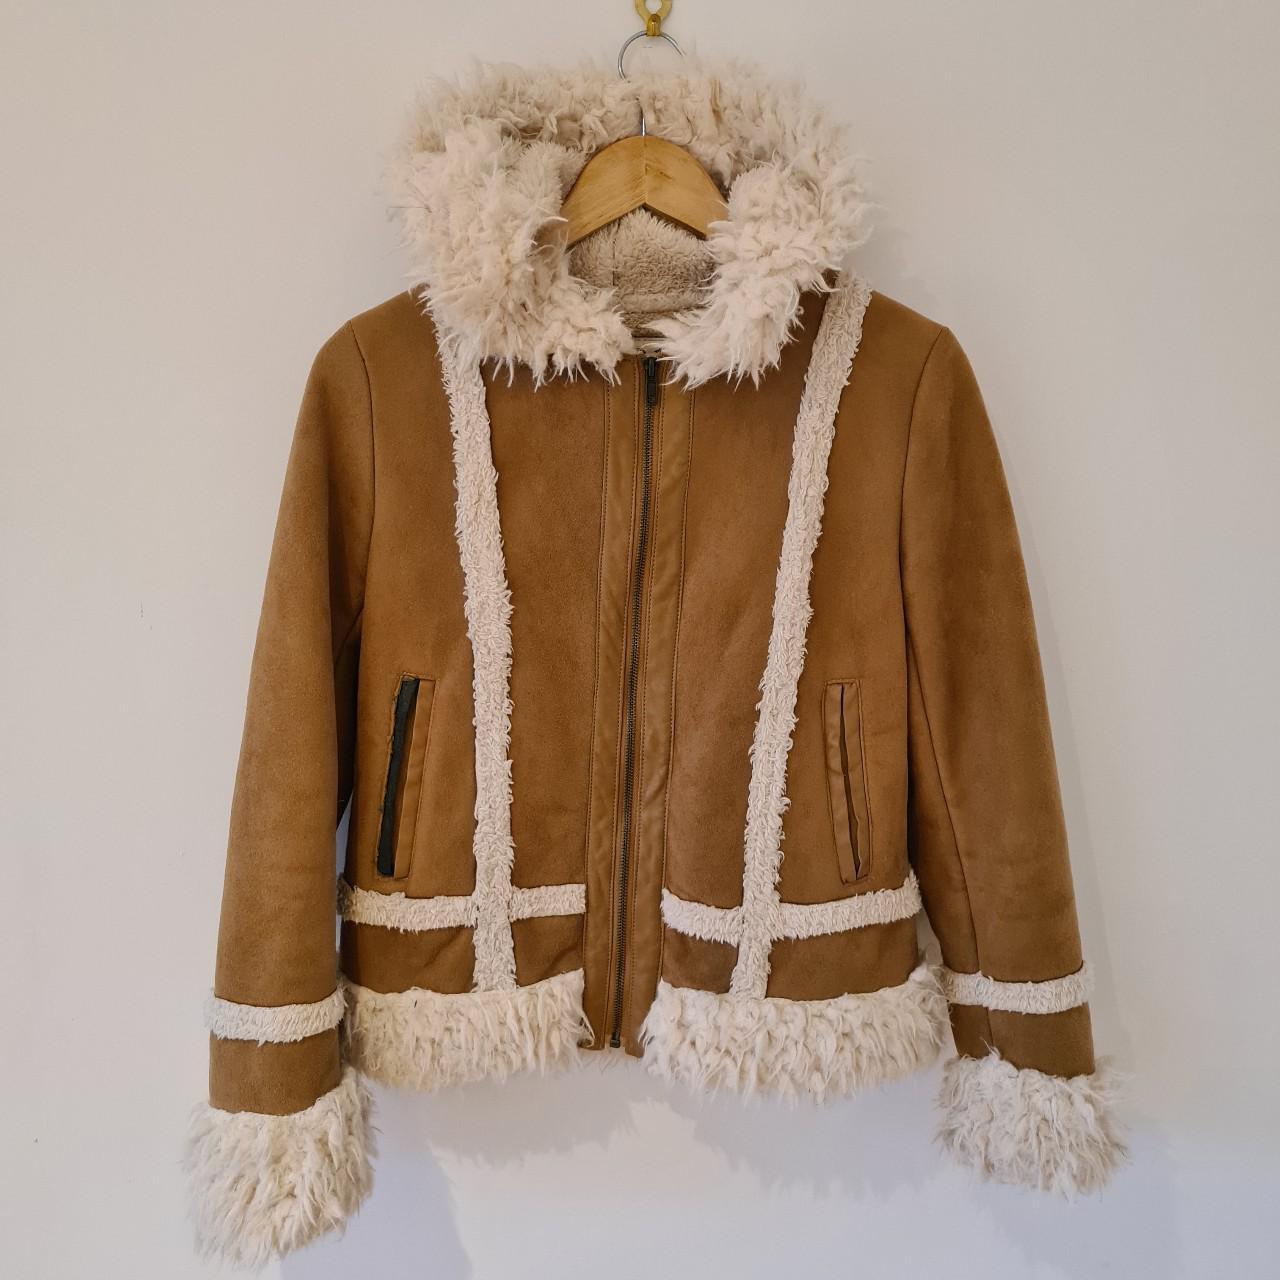 Vintage sheep skin jacket in tan colour with a... - Depop